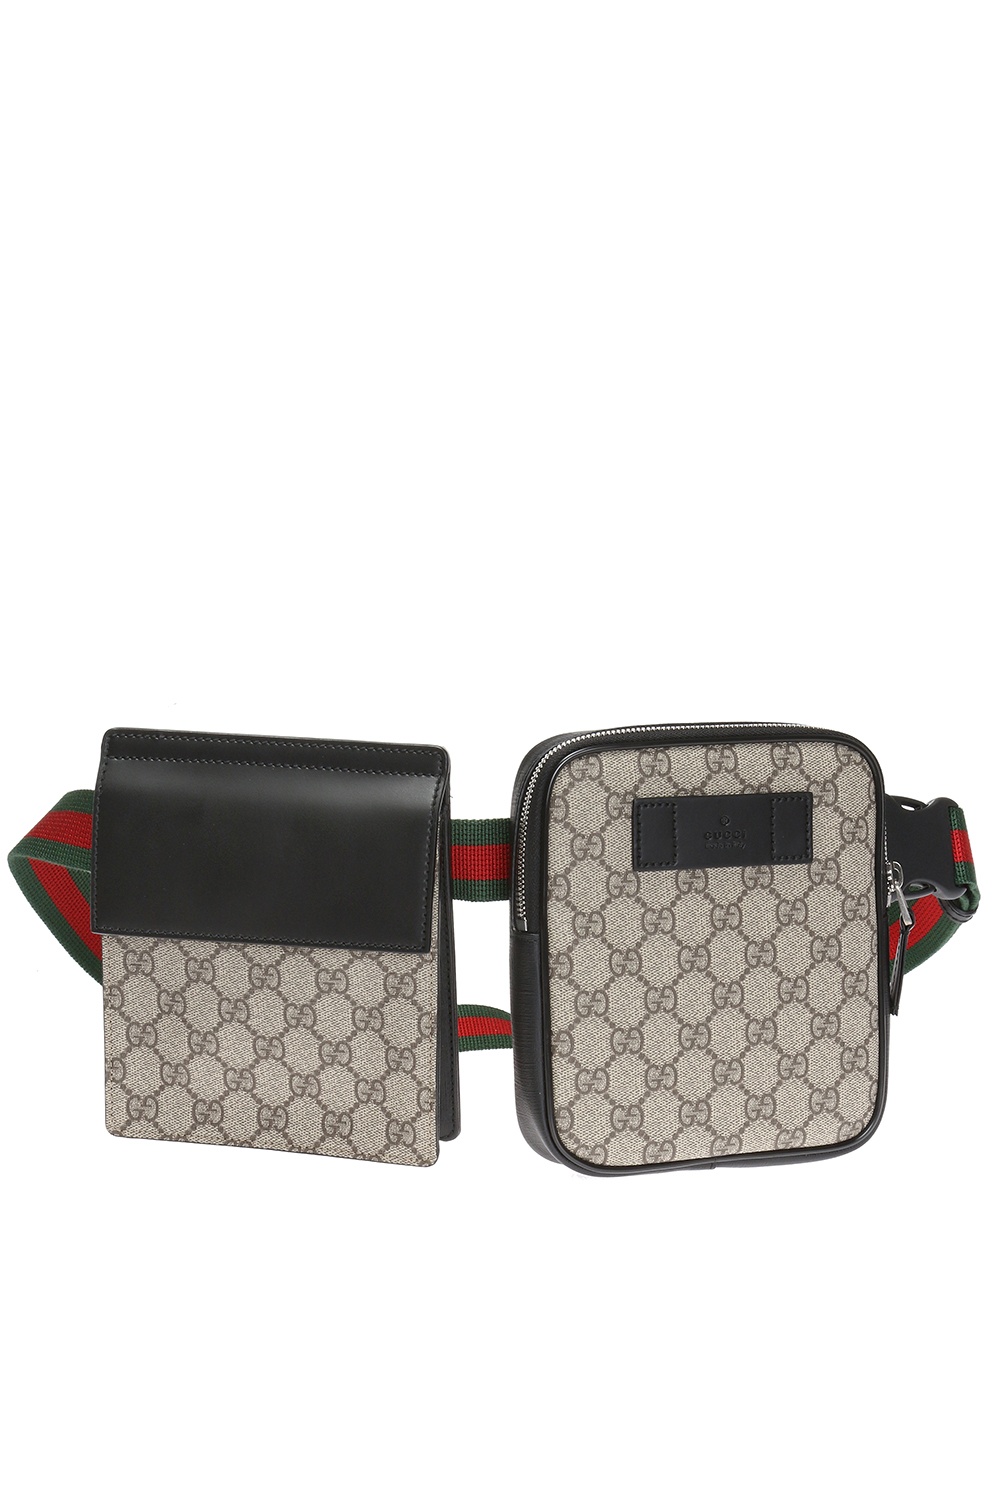 gucci two pouch belt bag